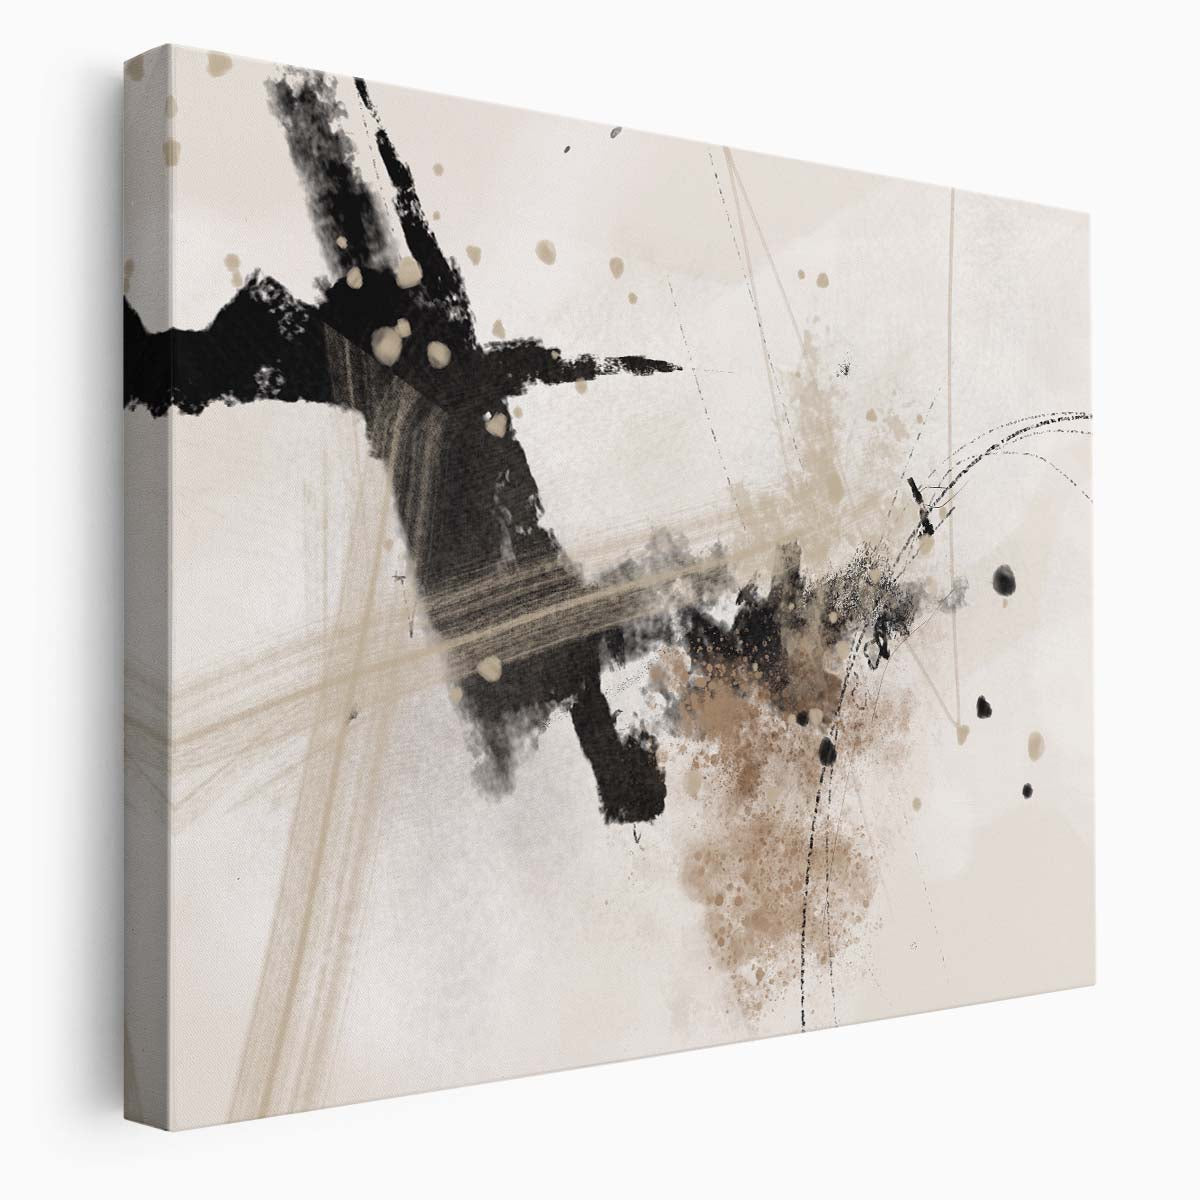 Geometric Abstract Beige & Black Paint Splash Wall Art by Luxuriance Designs. Made in USA.